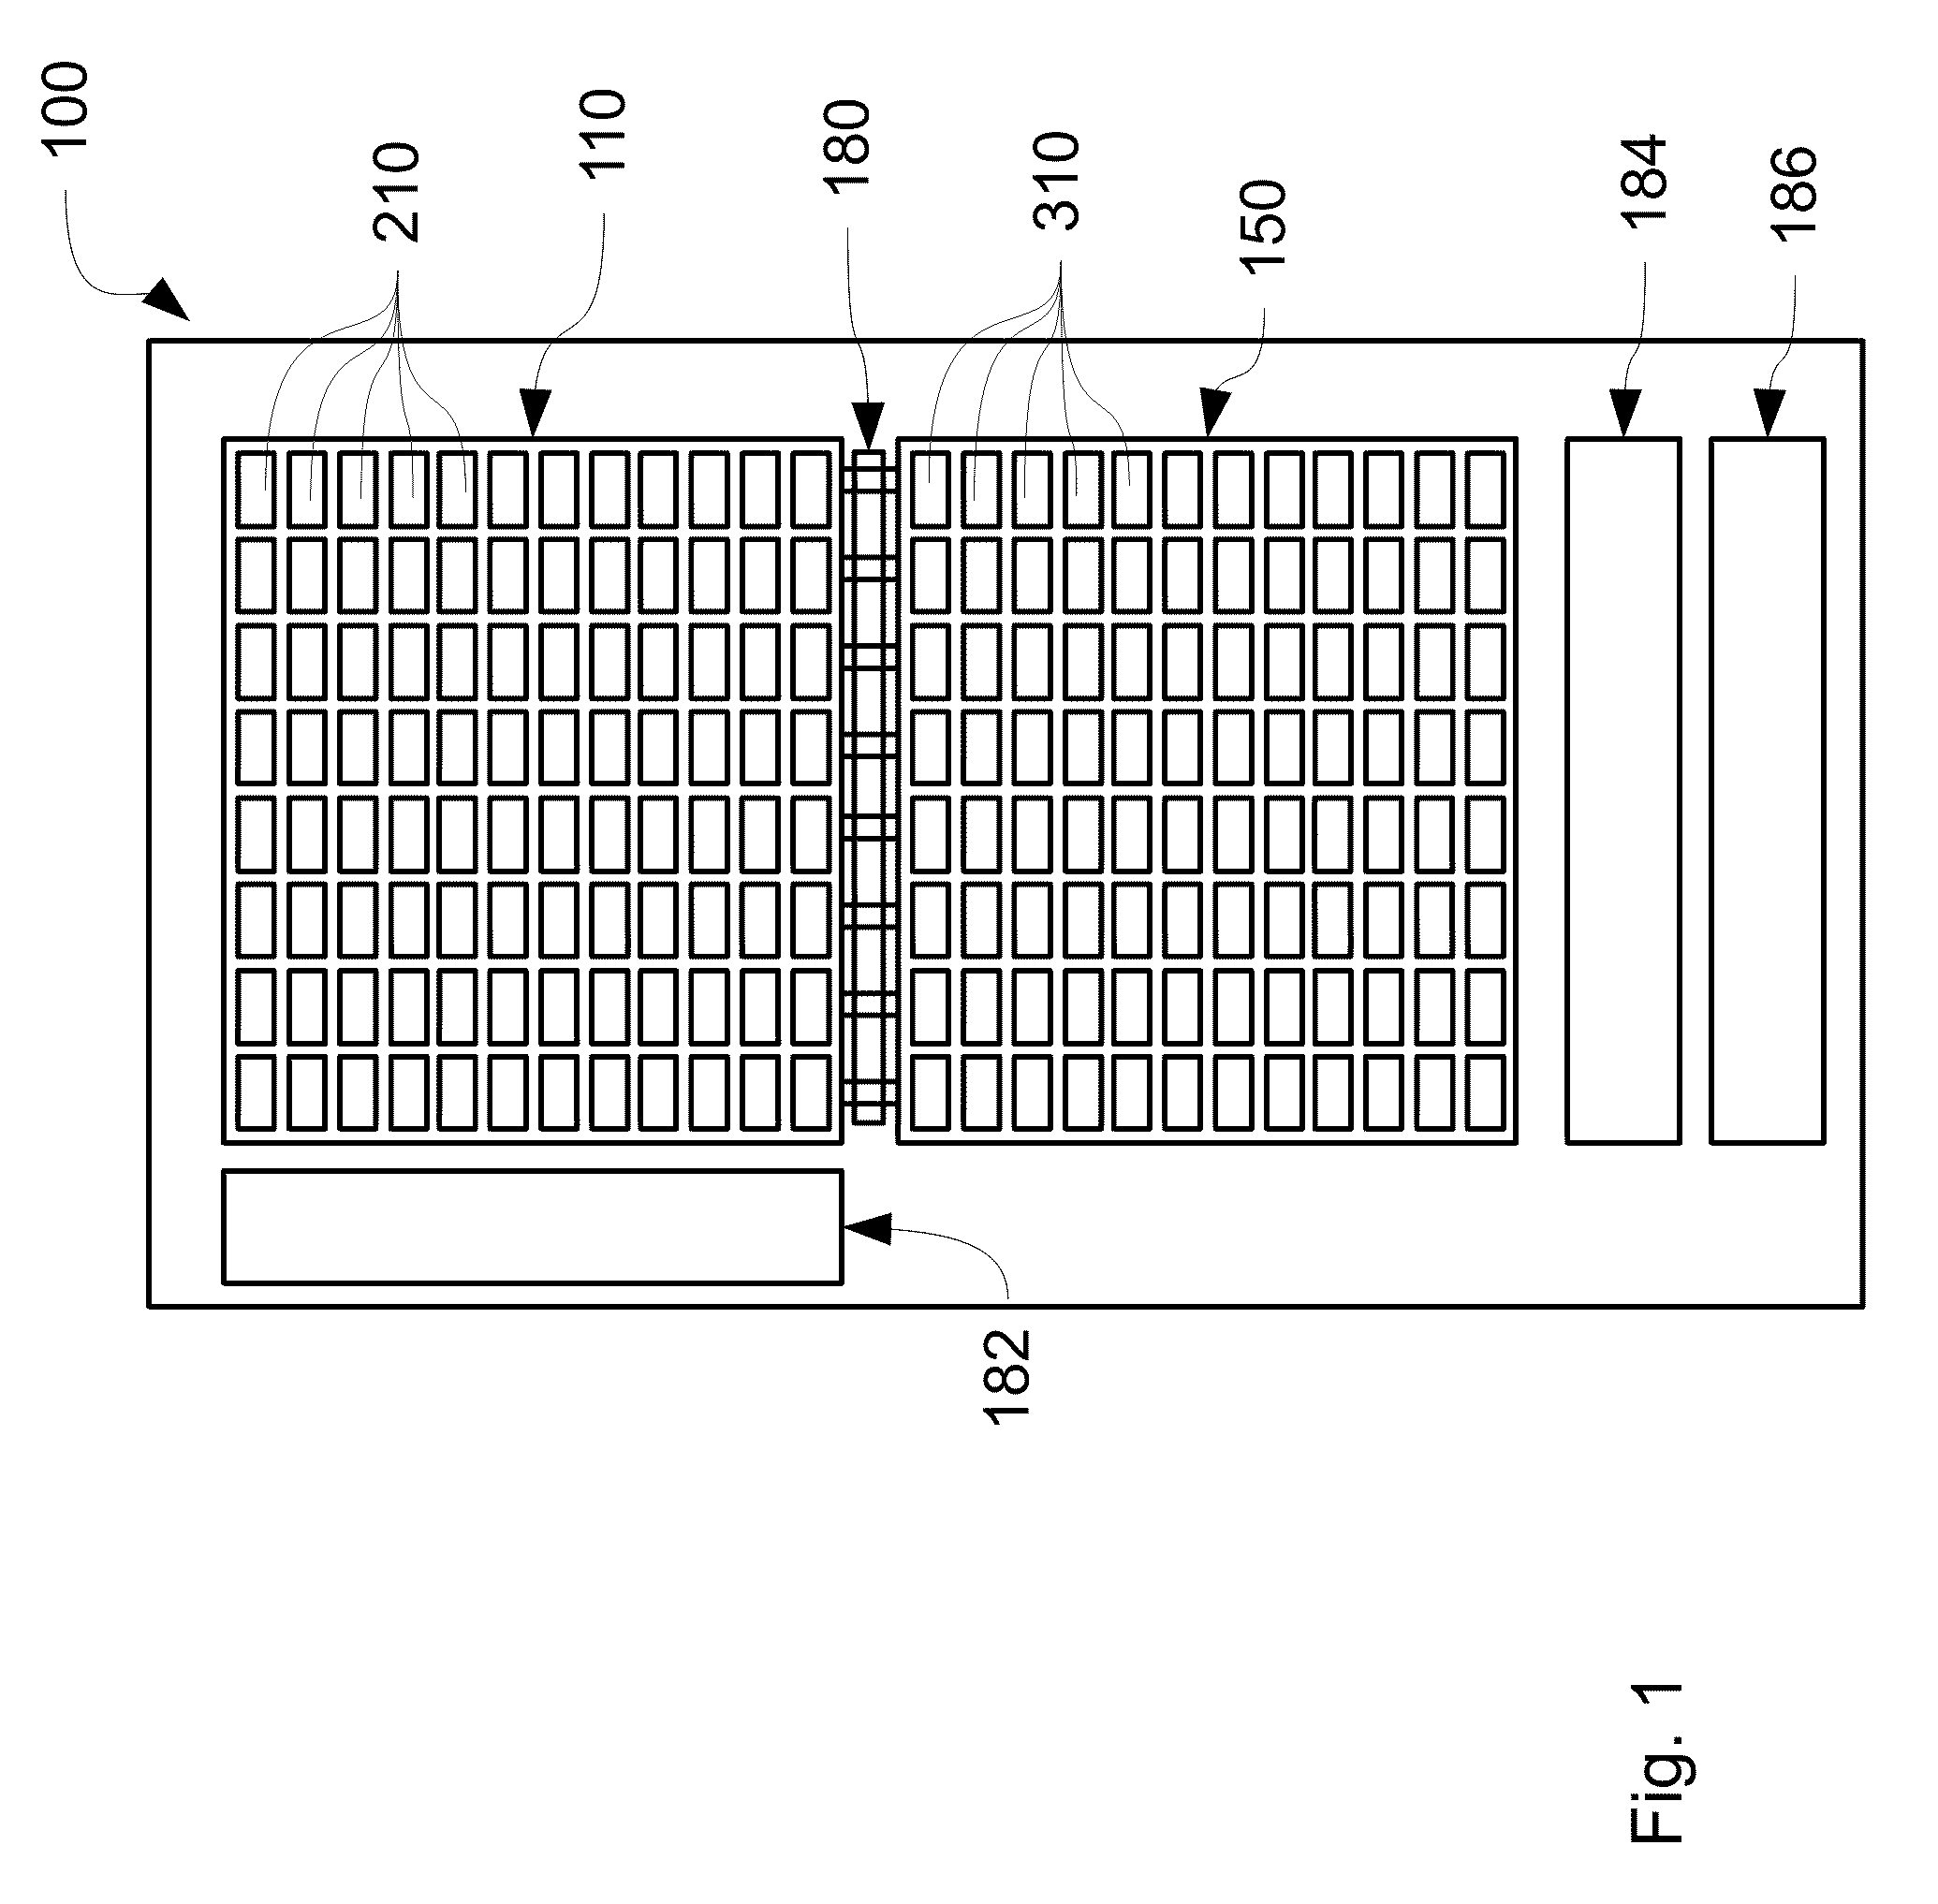 Demodulation sensor with separate pixel and storage arrays